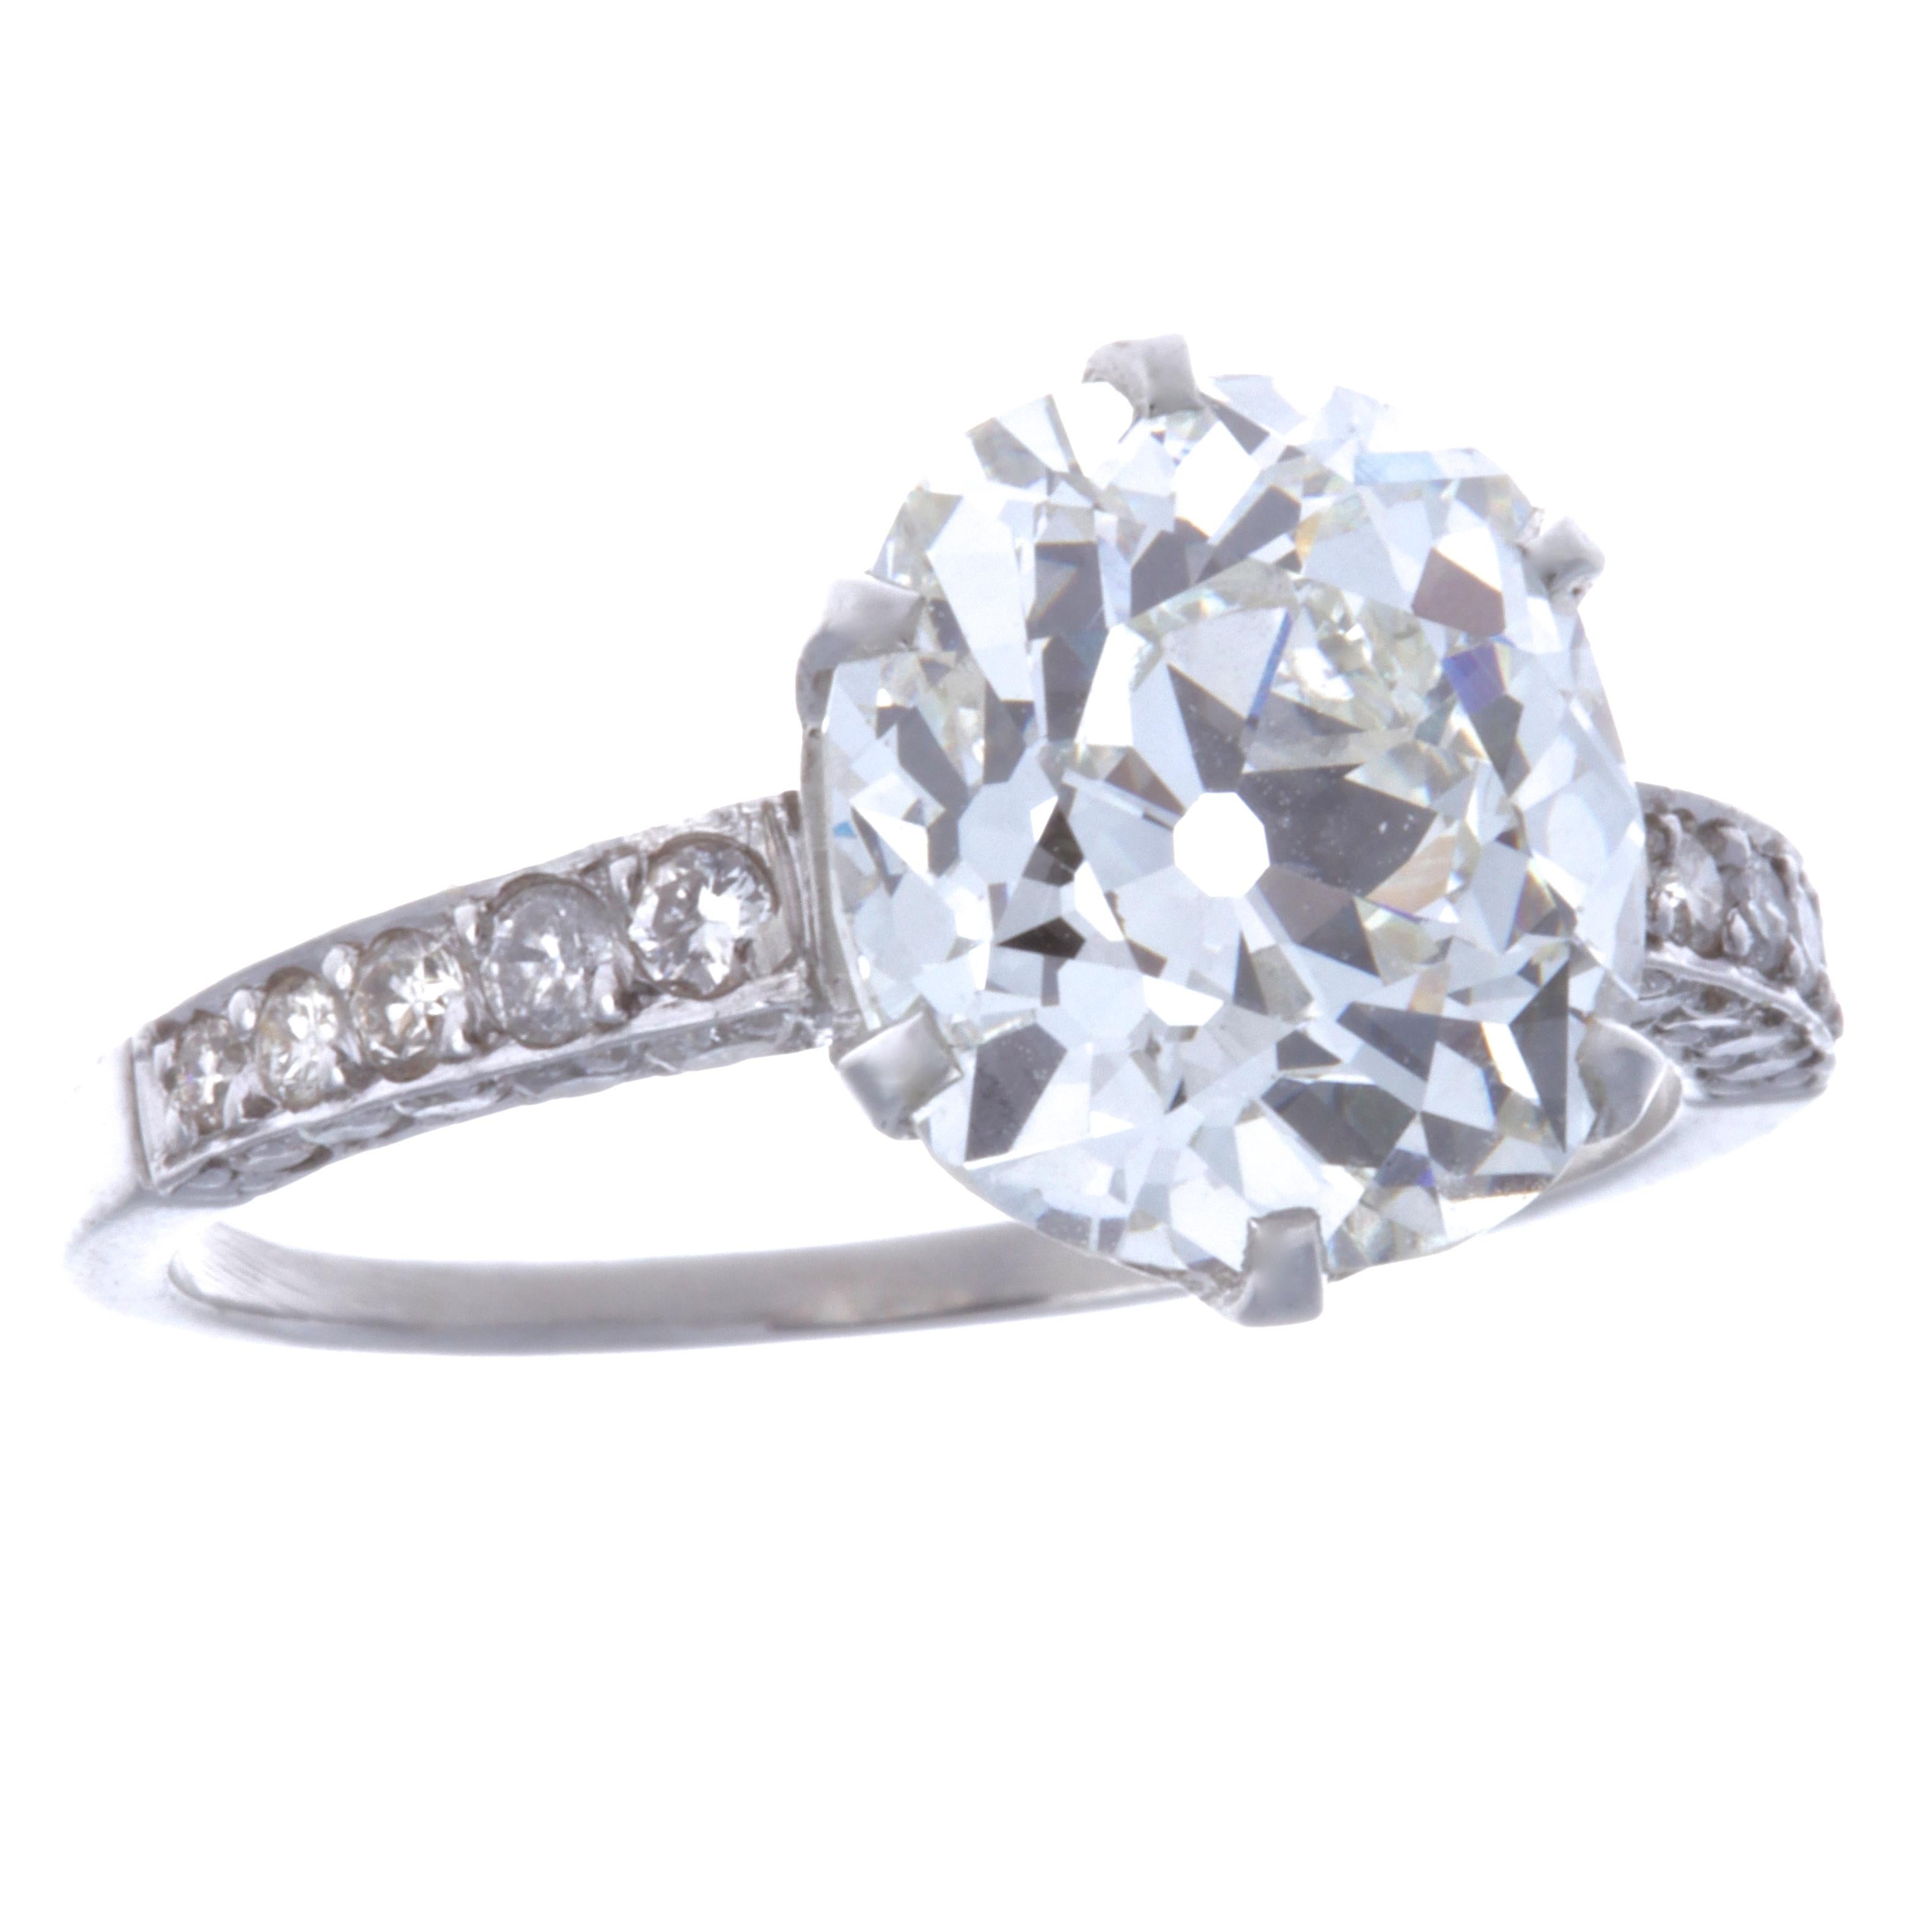 The ultimate Vintage engagement ring. The perfect diamond, the setting and the stunning band, all make a dream engagement ring. No matter where you go, this ring is definitely eye-catching. This GIA certified diamond platinum ring features an